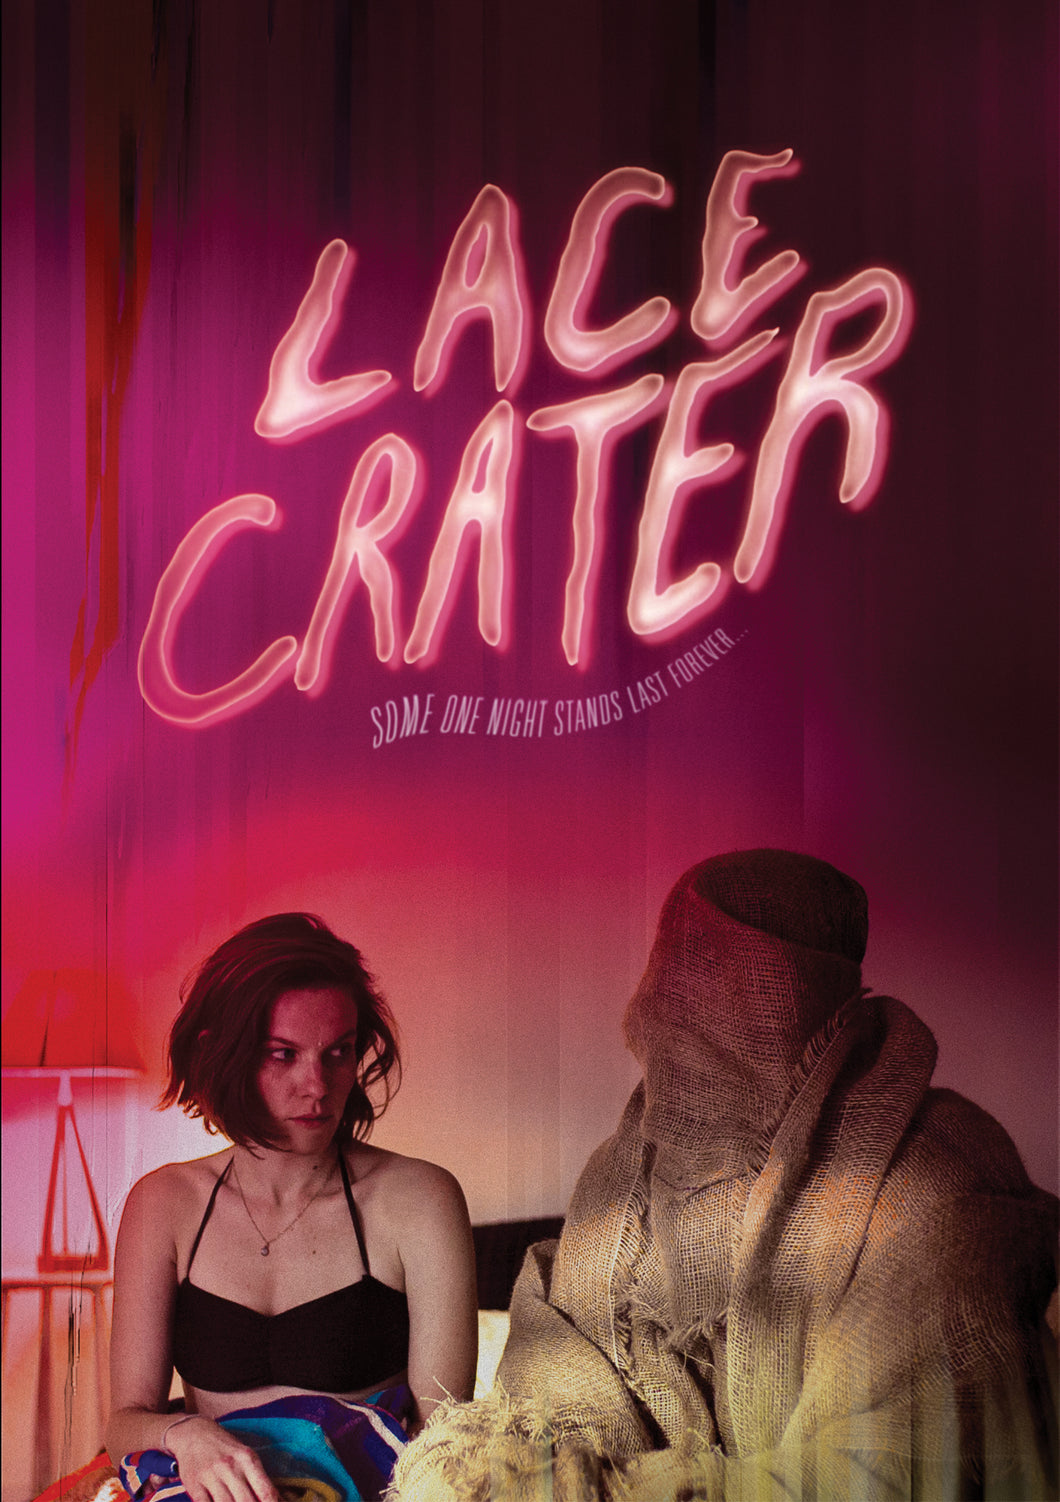 Lace Crater (DVD)